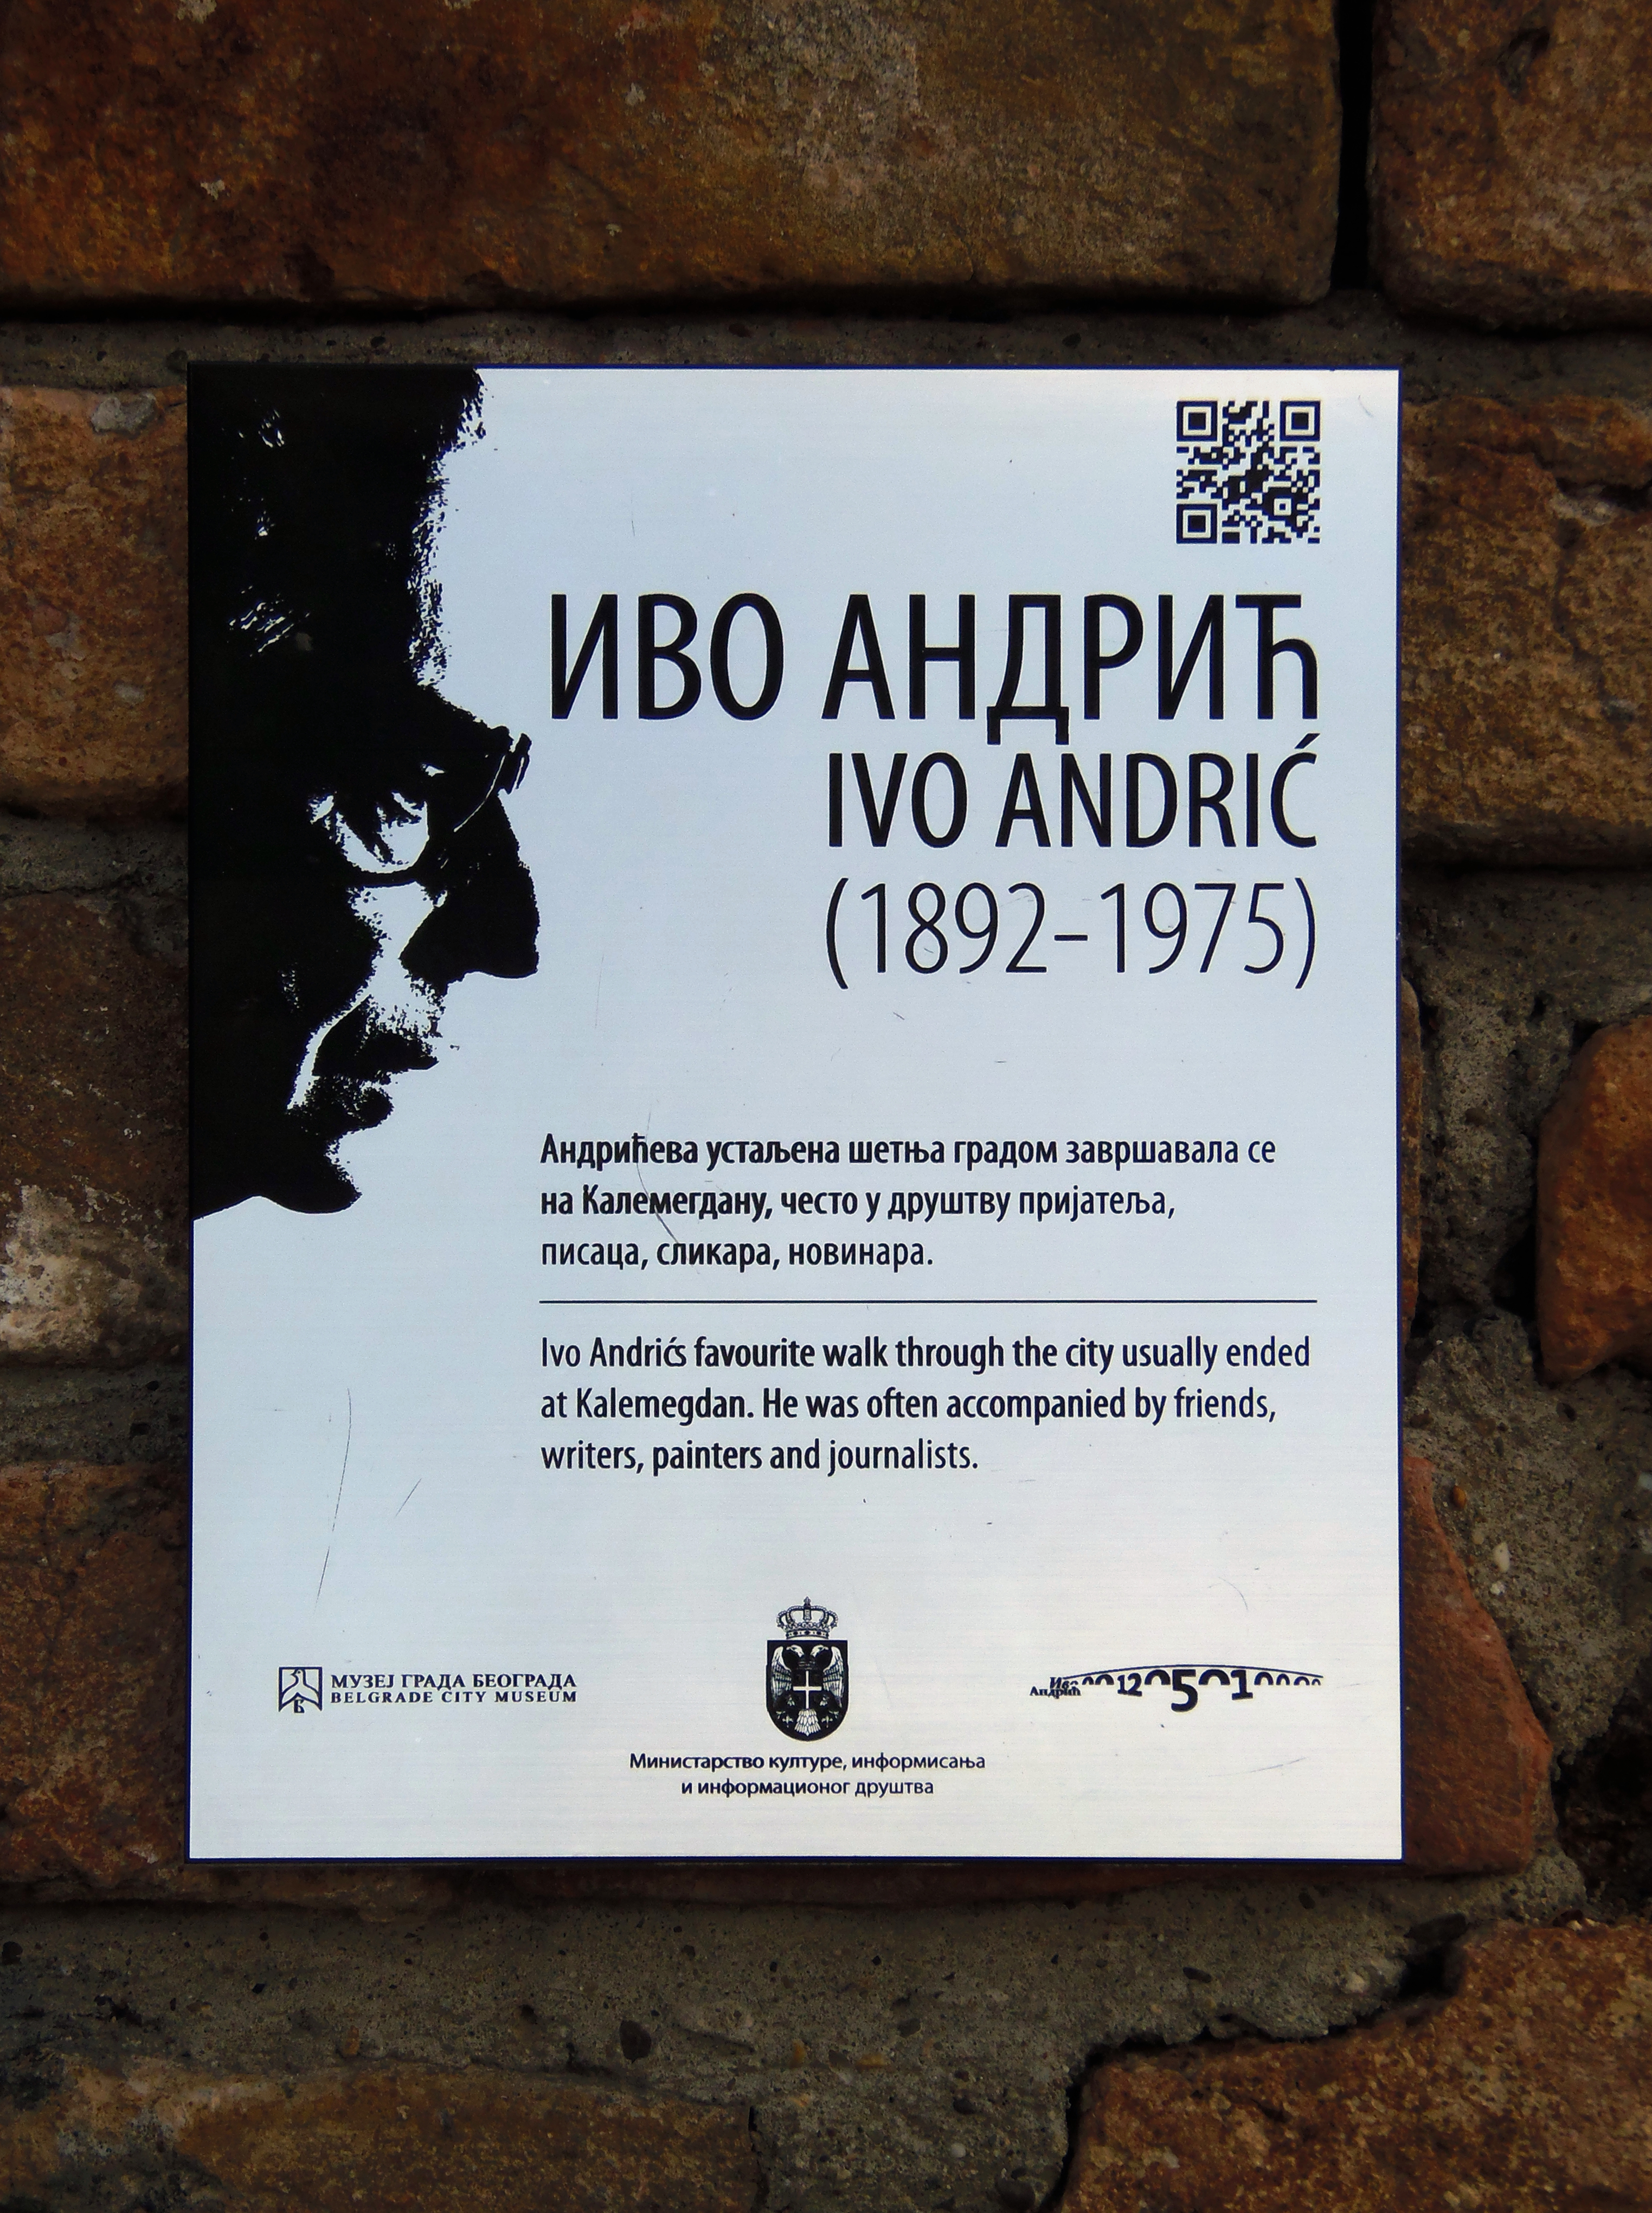 Image result for ivo andric museum belgrade images